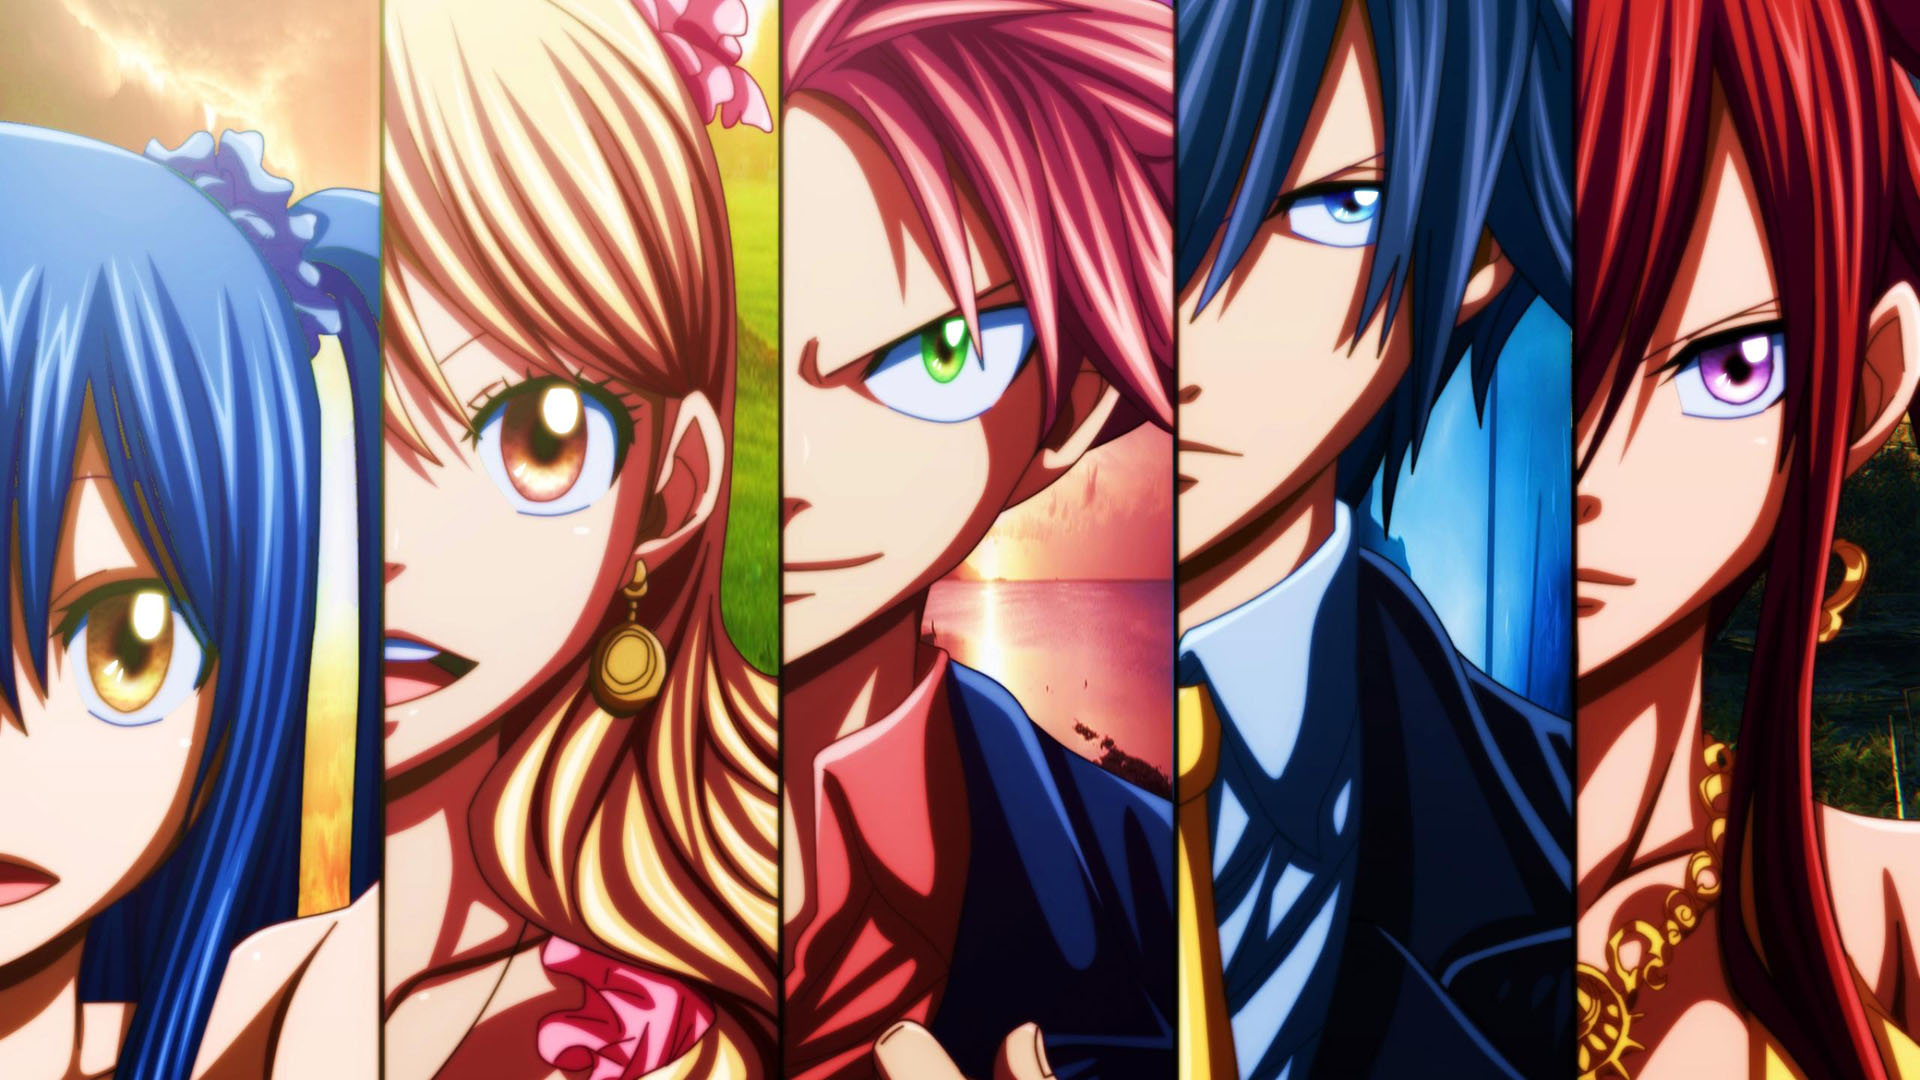 Fairy Tail Wallpaper Background Simple - fullwidehd.com